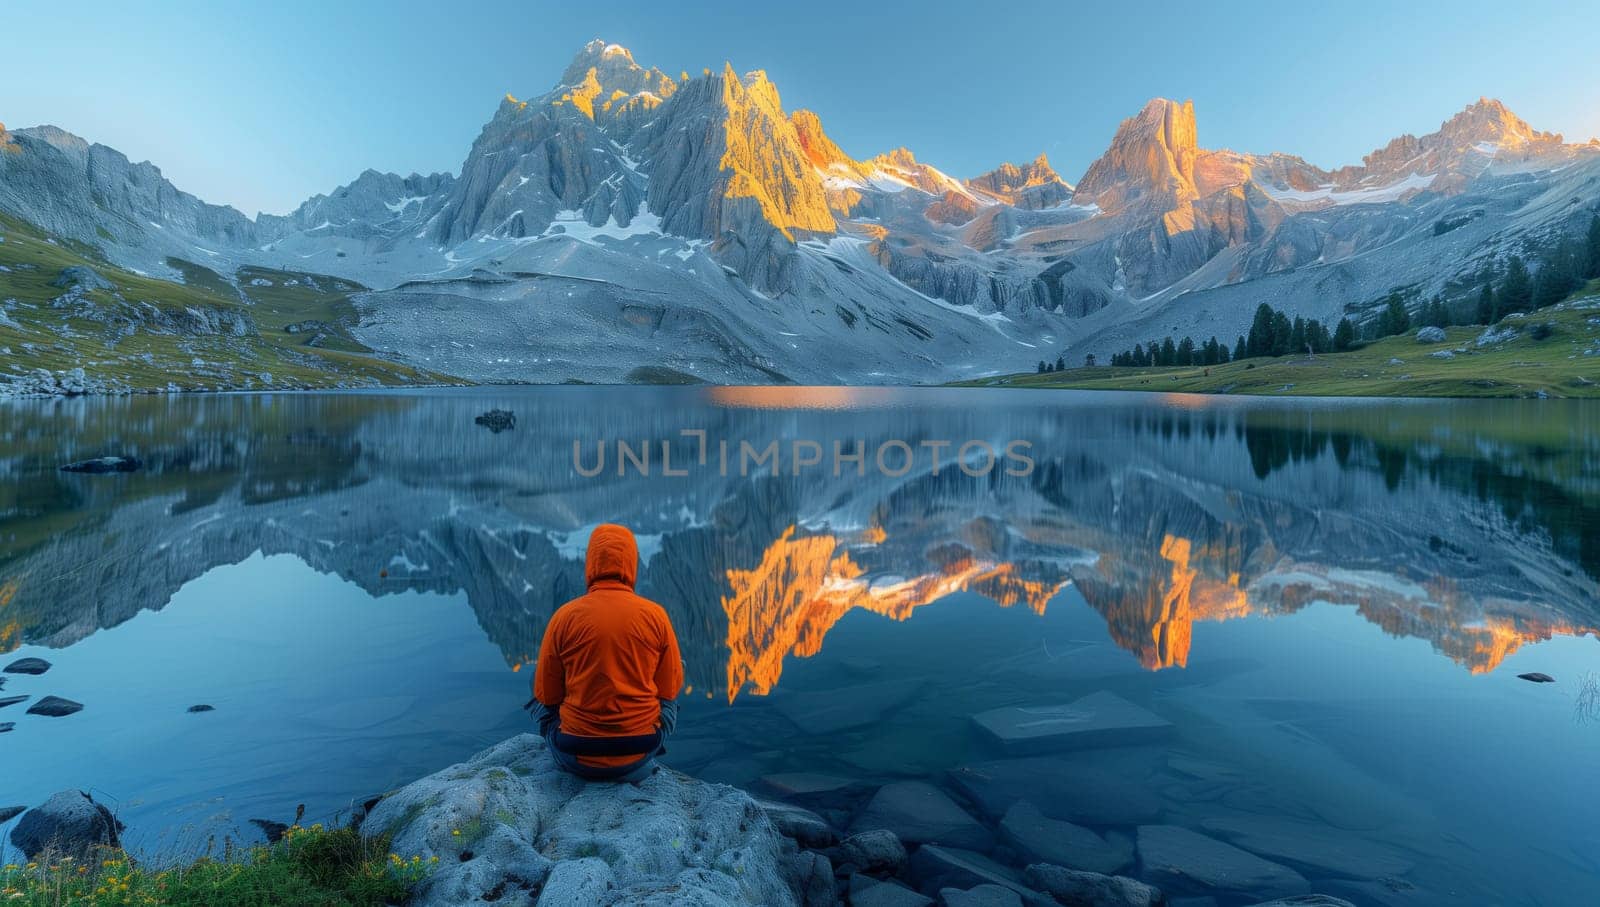 A person is relaxing on a boulder by a tranquil lake with majestic mountains and a clear blue sky in the natural landscape, enjoying the peaceful view